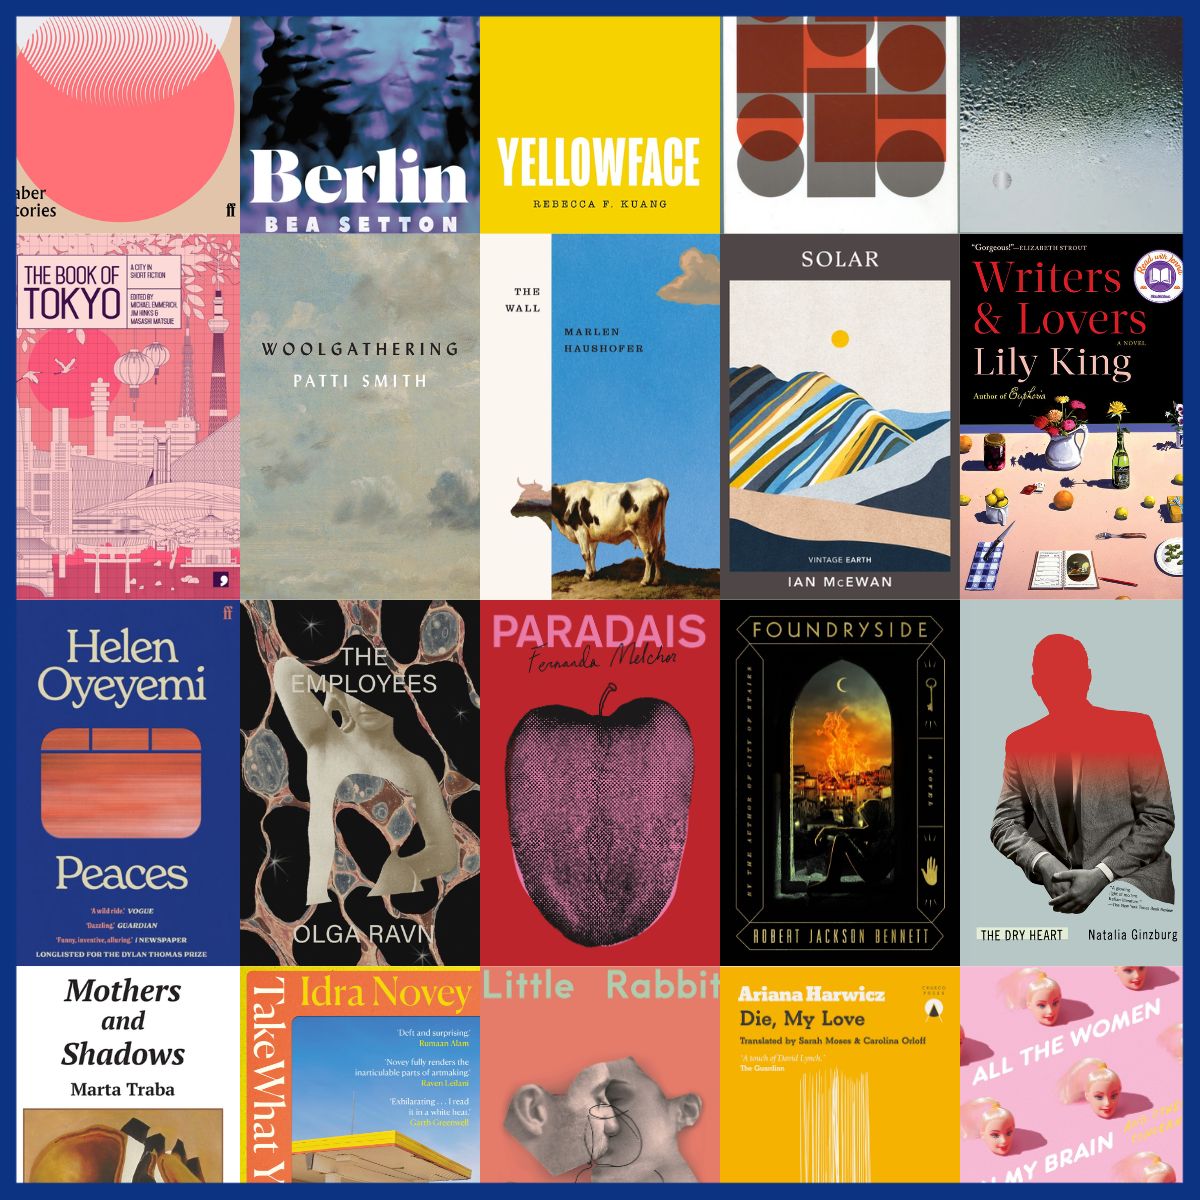 Sixty Books I Want to Read Based on Their Covers